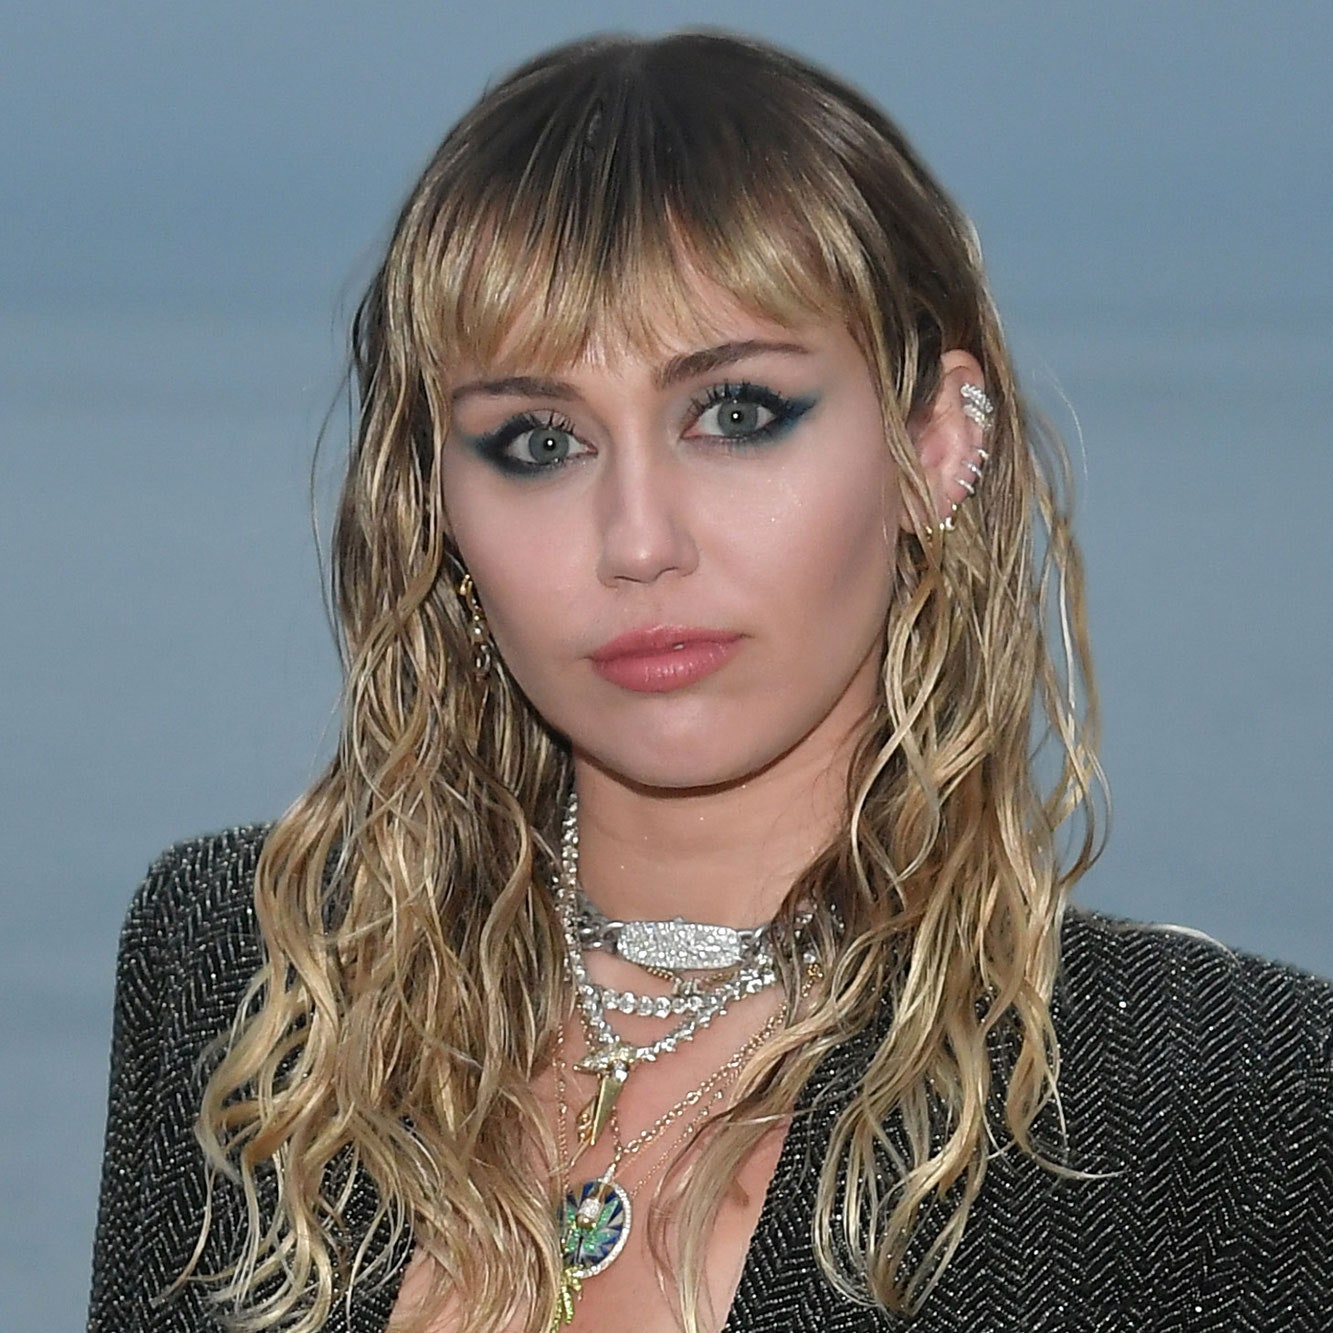 christy witte recommends miley cyrus wet and ready pic